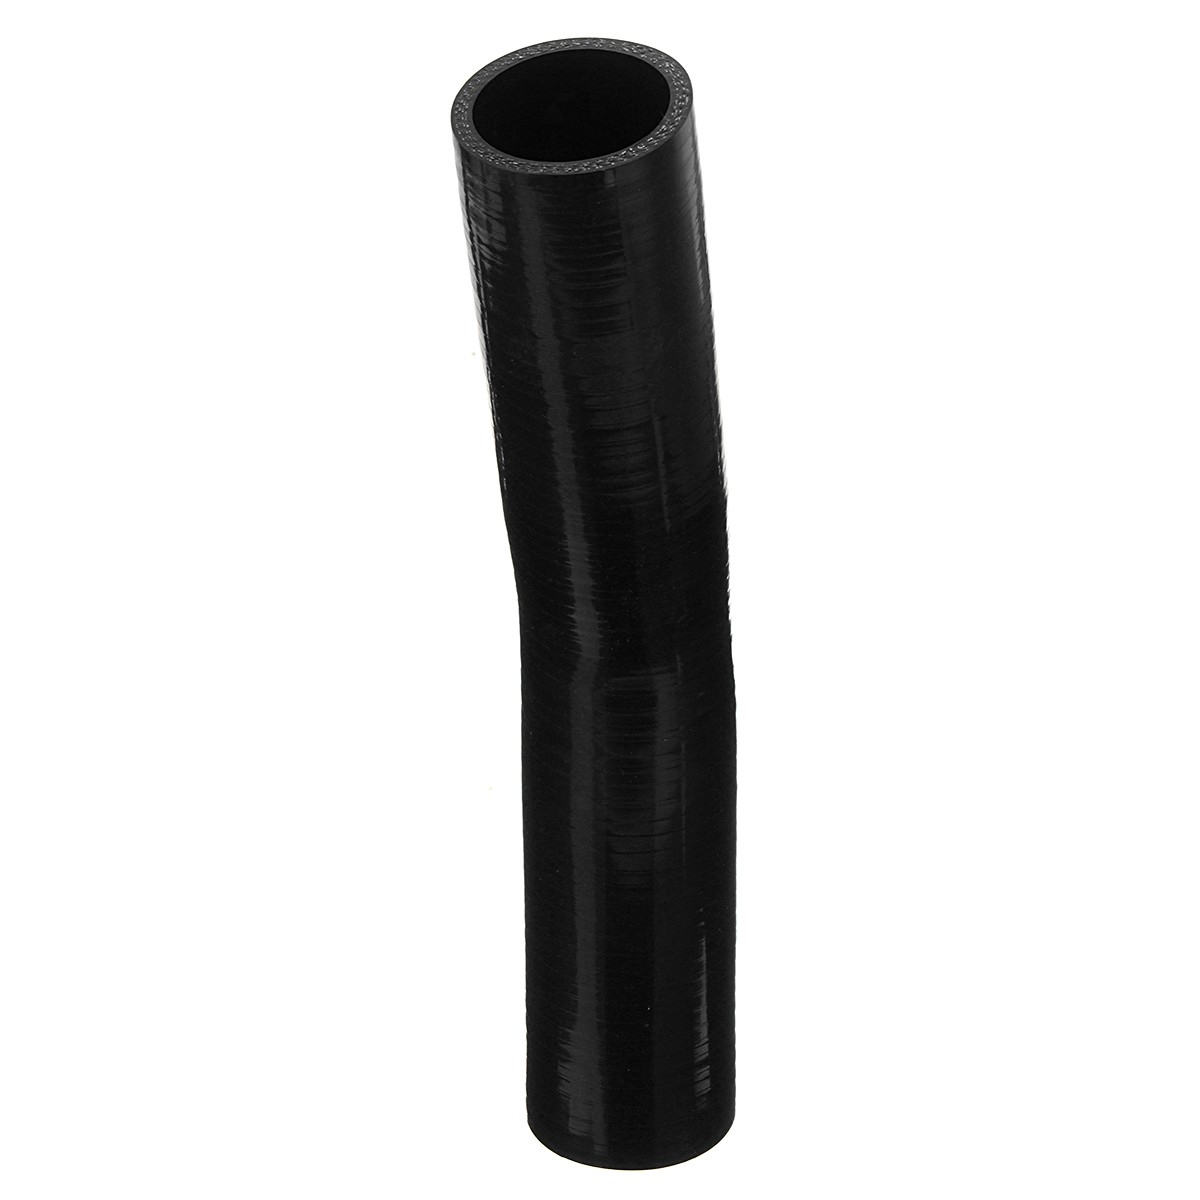 150mm-Black-Silicone-Hose-Rubber-15-Degree-Elbow-Bend-Hose-Air-Water-Coolant-Joiner-Pipe-Tube-1591449-3